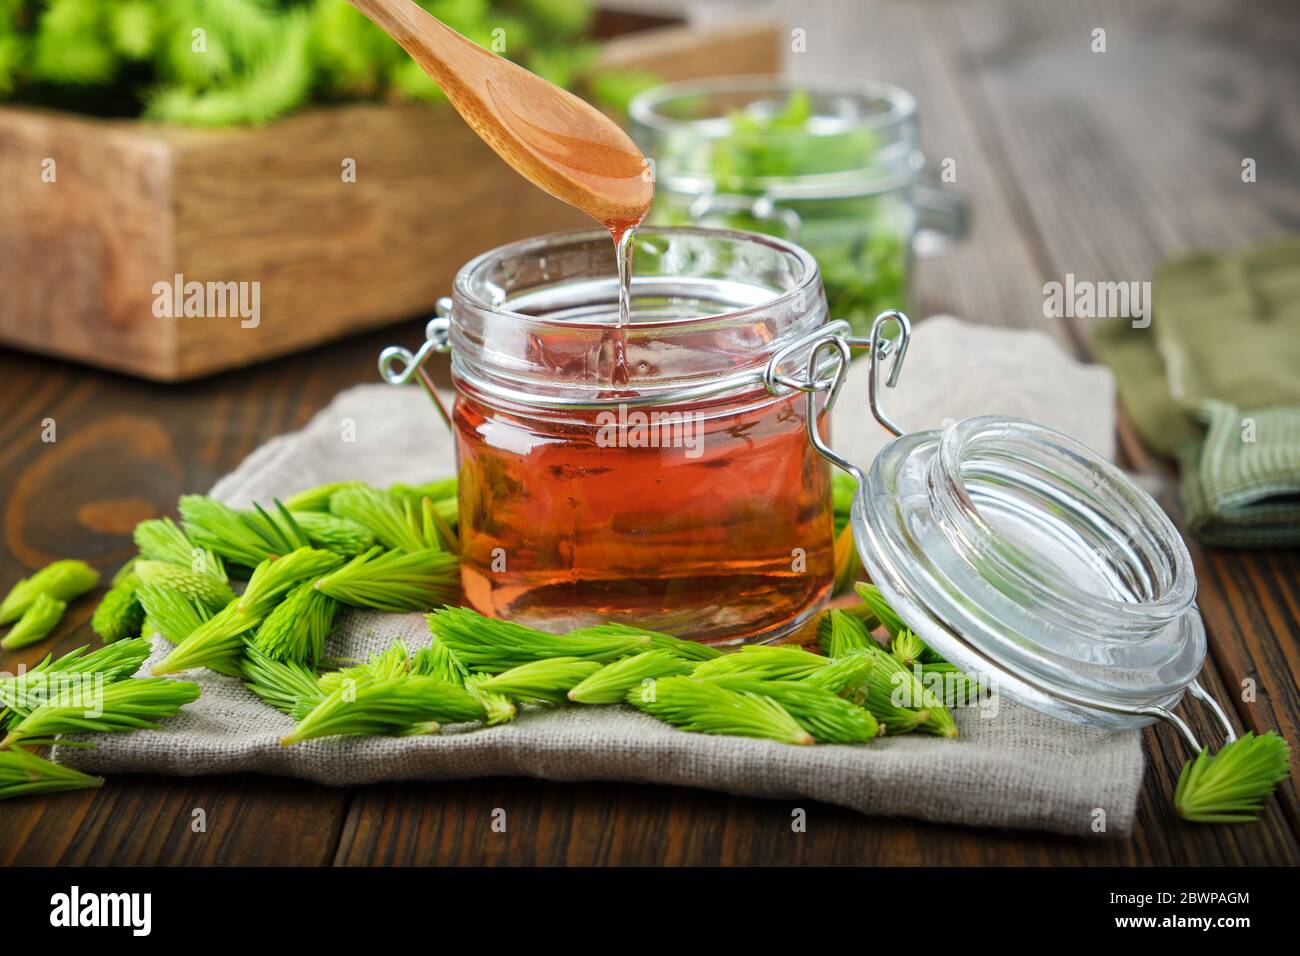 Jar of  jam or honey from fir buds and needles, spoon with  flowing syrup. Twigs of fir tree on wooden table. Making spruce tips jam at home. Stock Photo